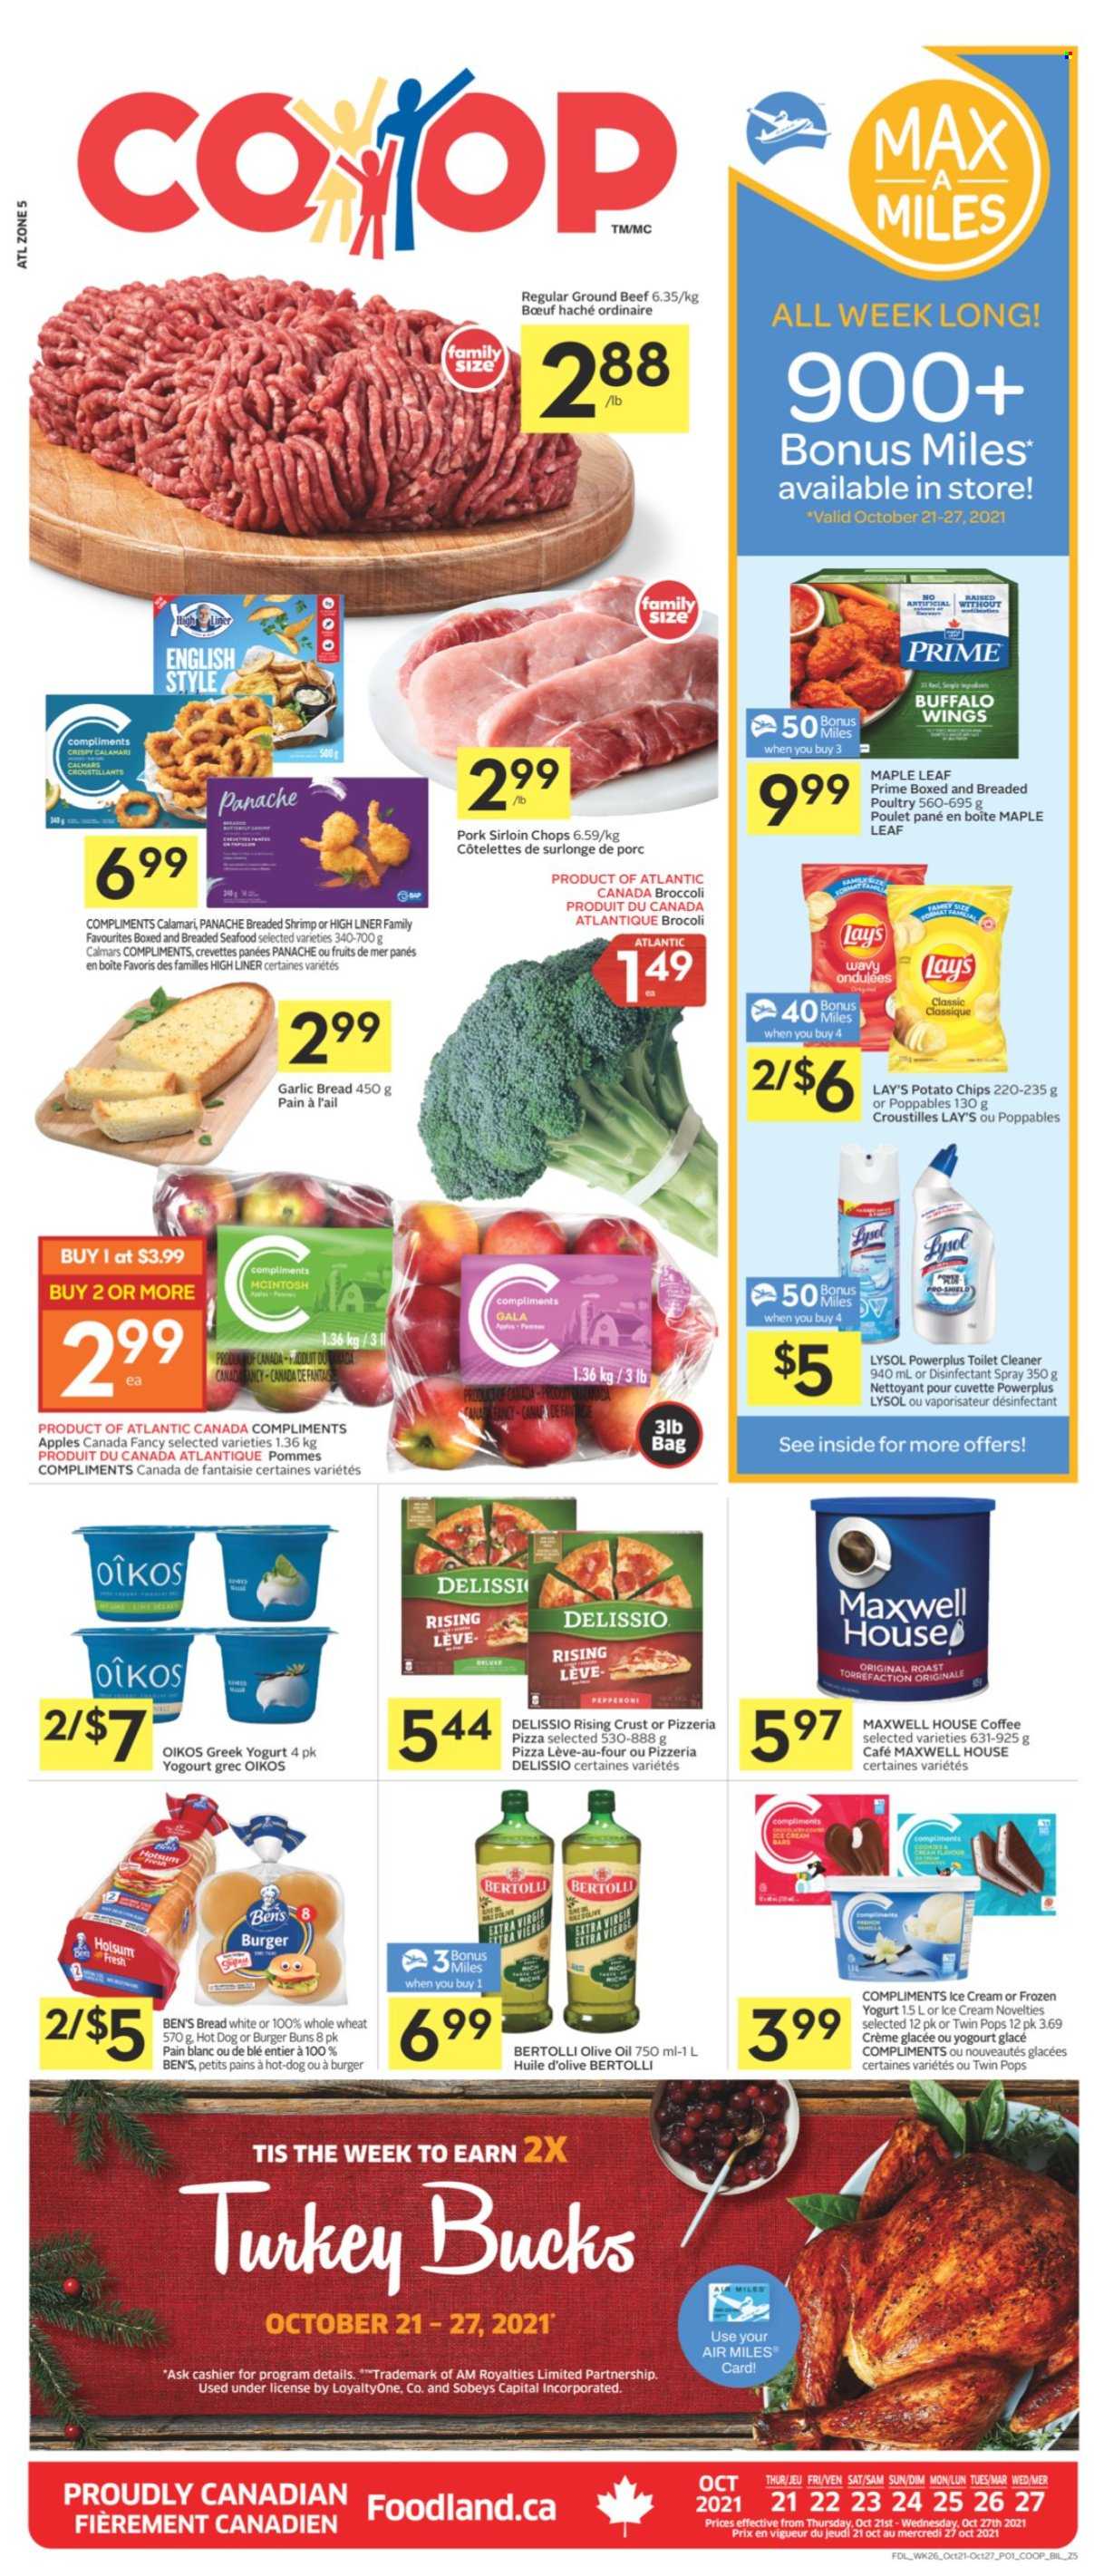 Co-op Flyer - October 21, 2021 - October 27, 2021 - Sales products - bread, buns, burger buns, broccoli, apples, Gala apple, calamari, seafood, shrimps, hot dog, pizza, Bertolli, pepperoni, greek yoghurt, yoghurt, Oikos, ice cream, potato chips, Lay's, flour, olive oil, oil, Maxwell House, coffee, L'Or, beef meat, ground beef, pork loin, antibacterial spray, desinfection. Page 1.